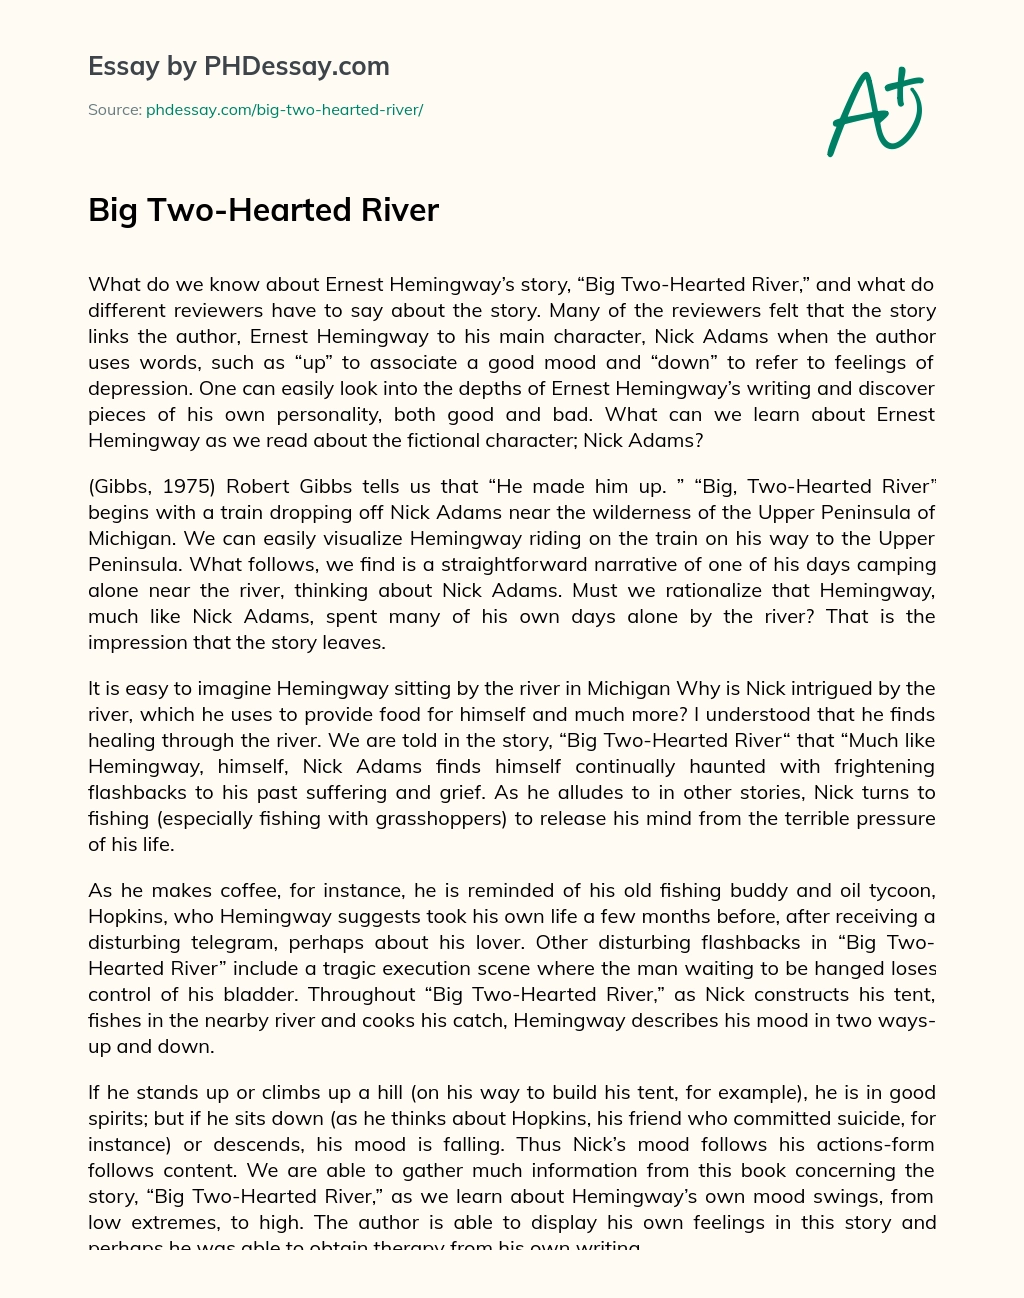 Big Two-Hearted River essay